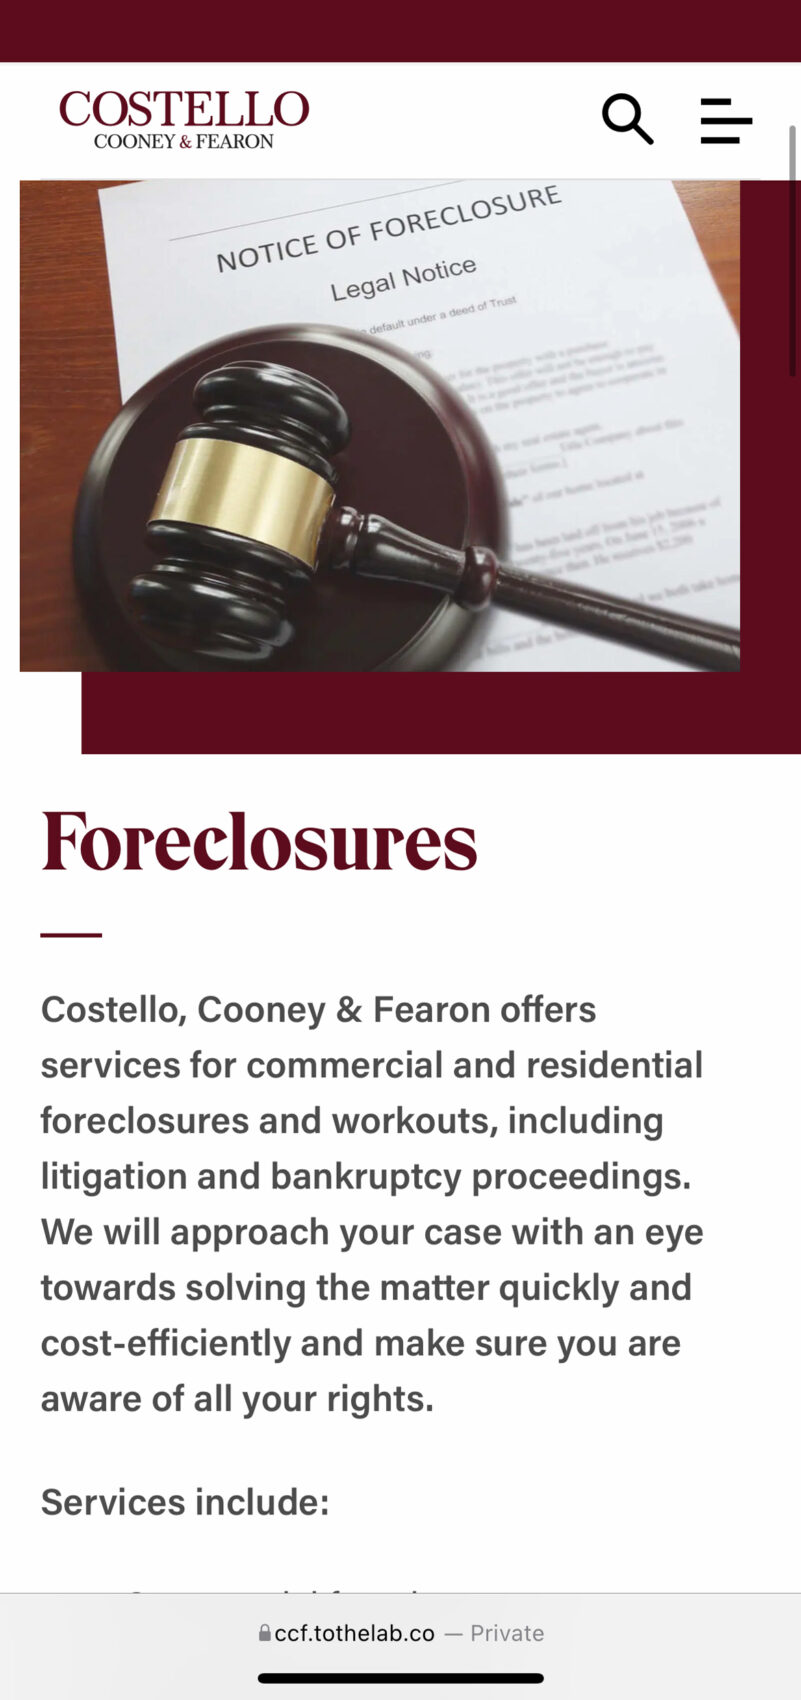 A mobile view of the Costello website showing a Practice Area page for Foreclosures